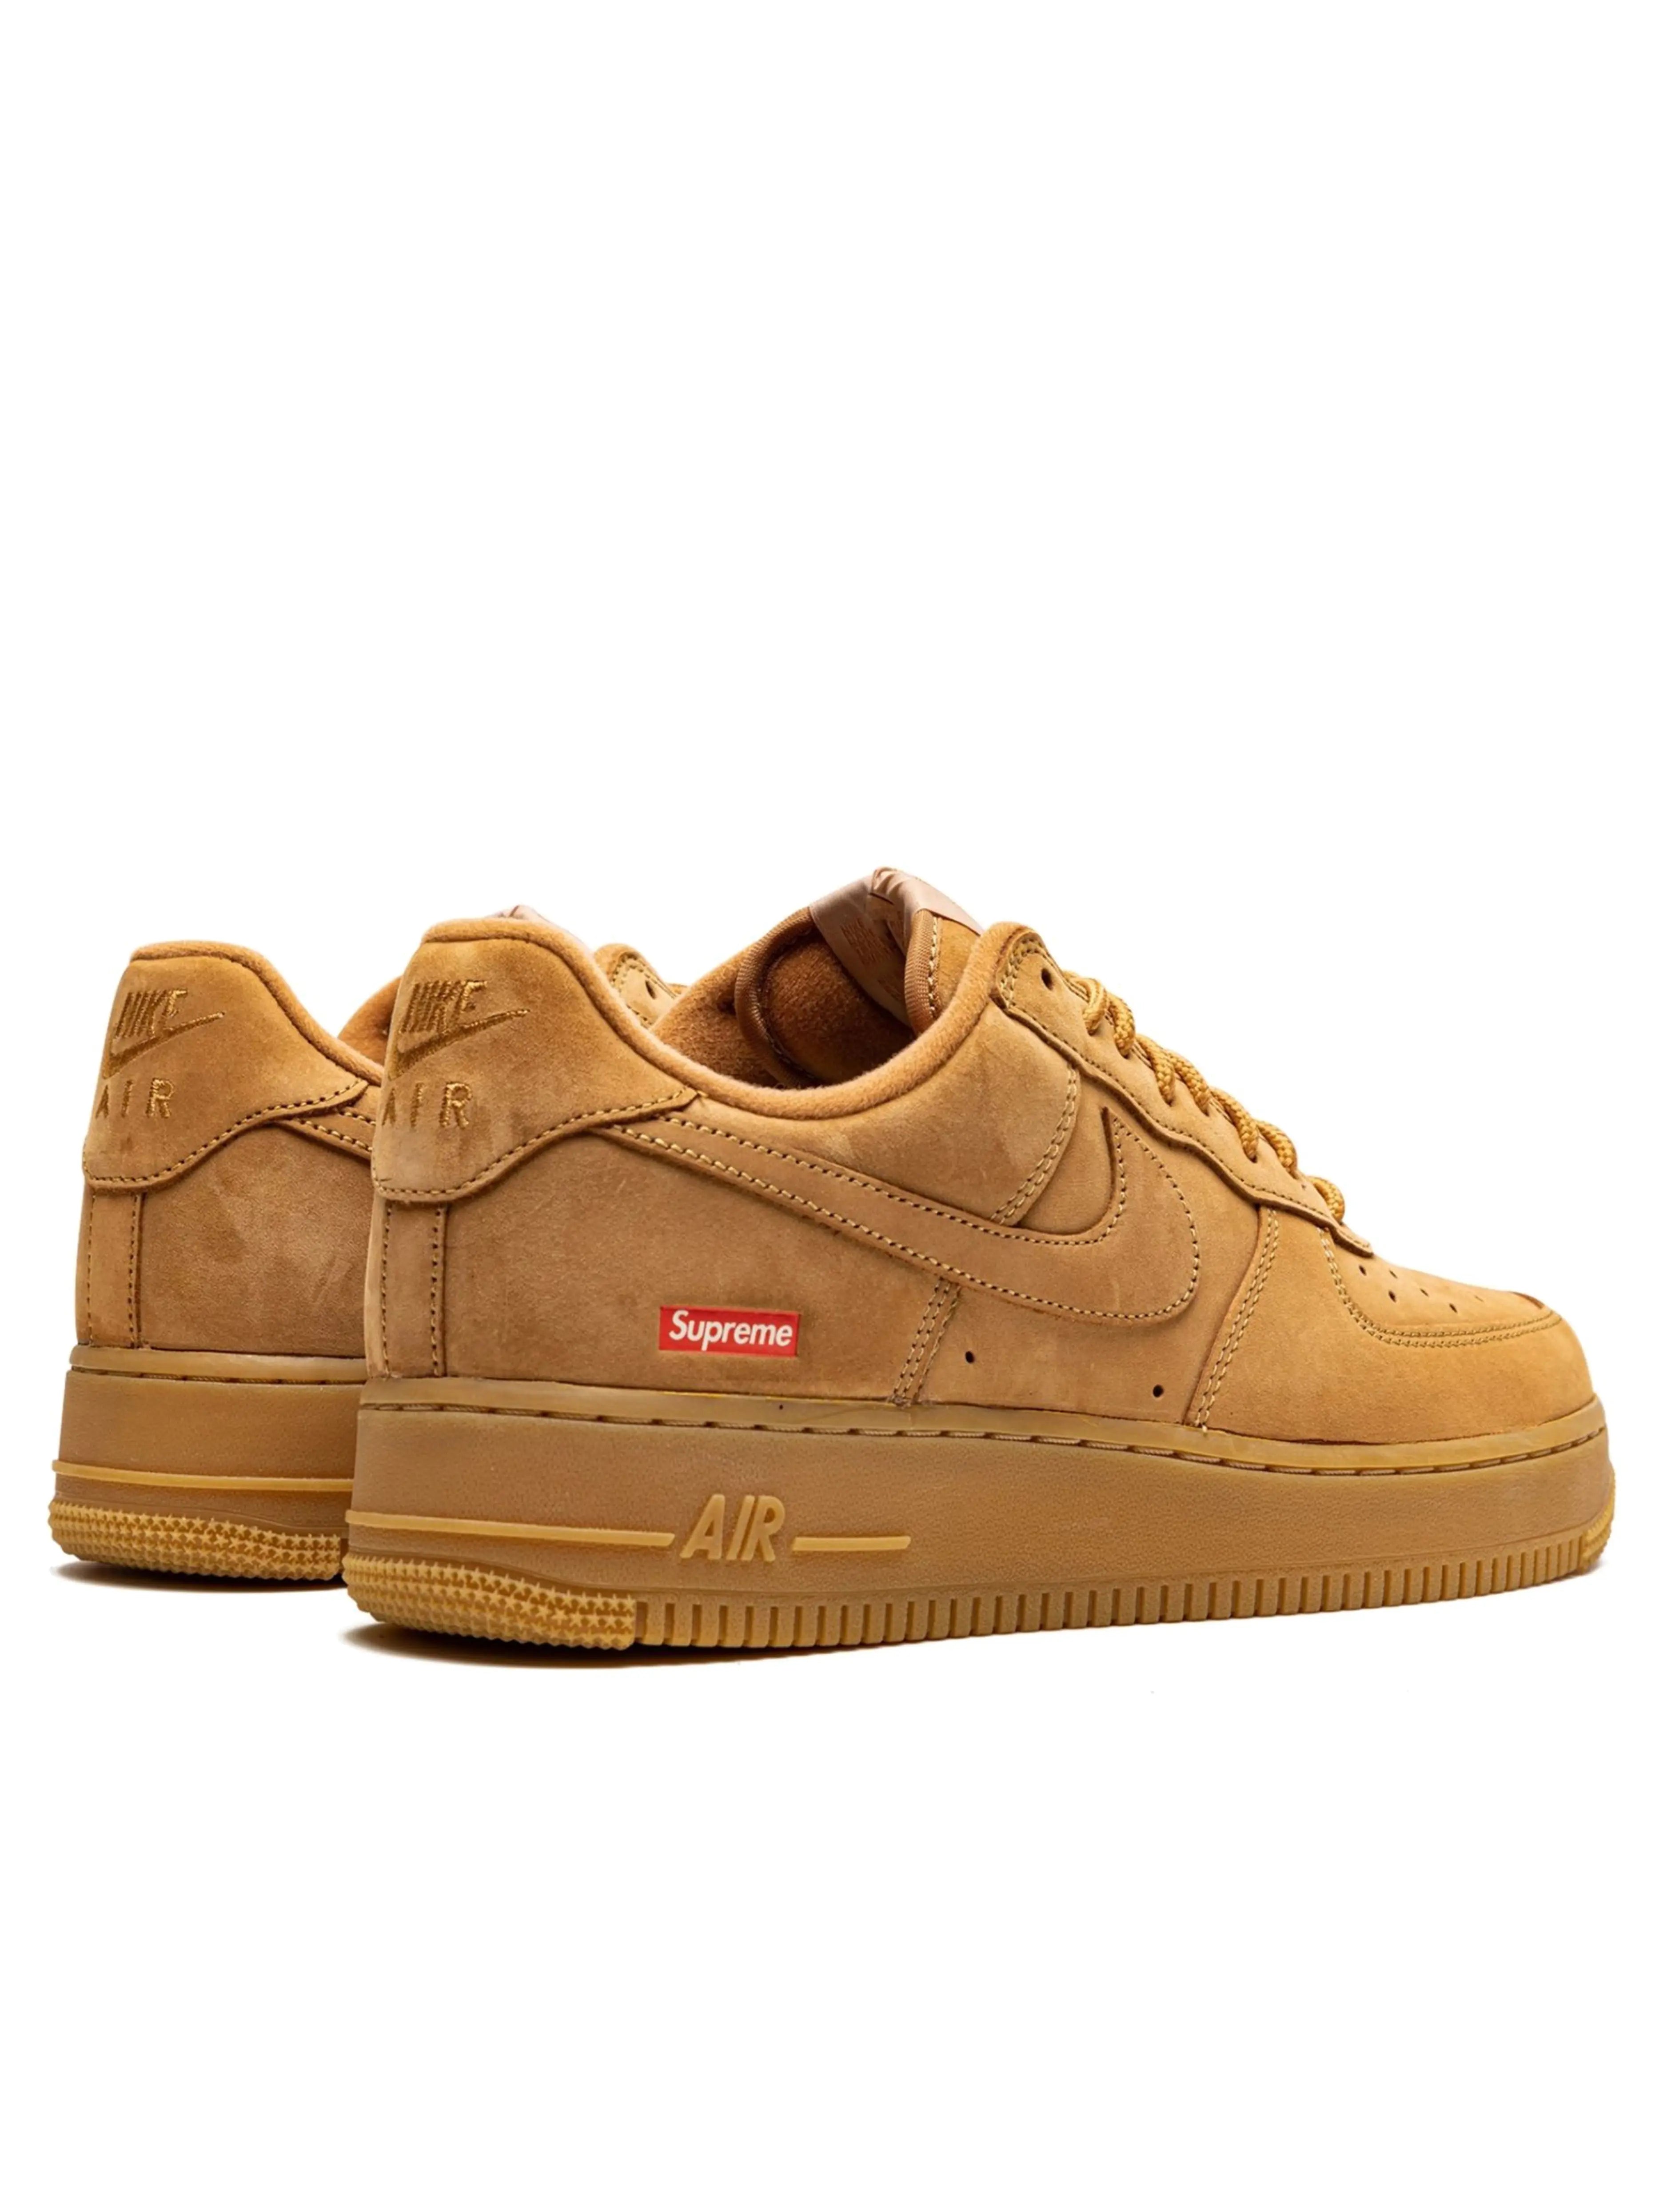 Nike Air Force 1 Low SP Supreme Wheat in Auckland, New Zealand - Prior